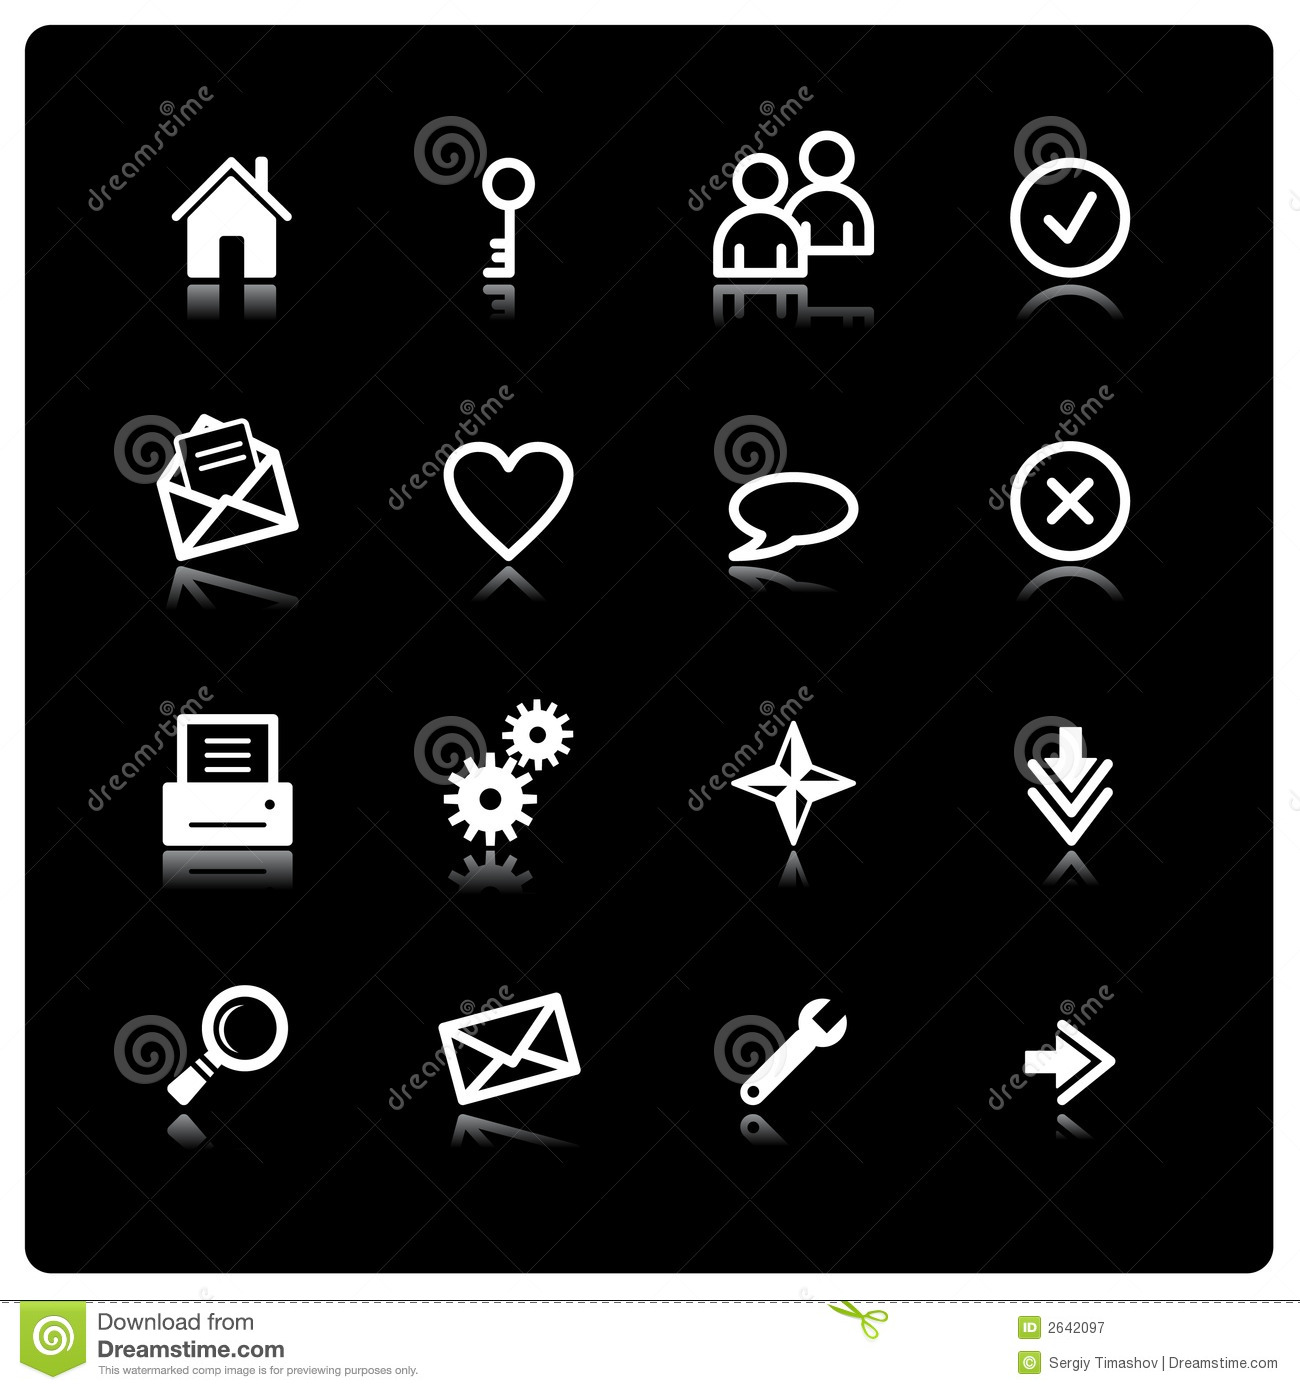 Free Web Icons Black and White